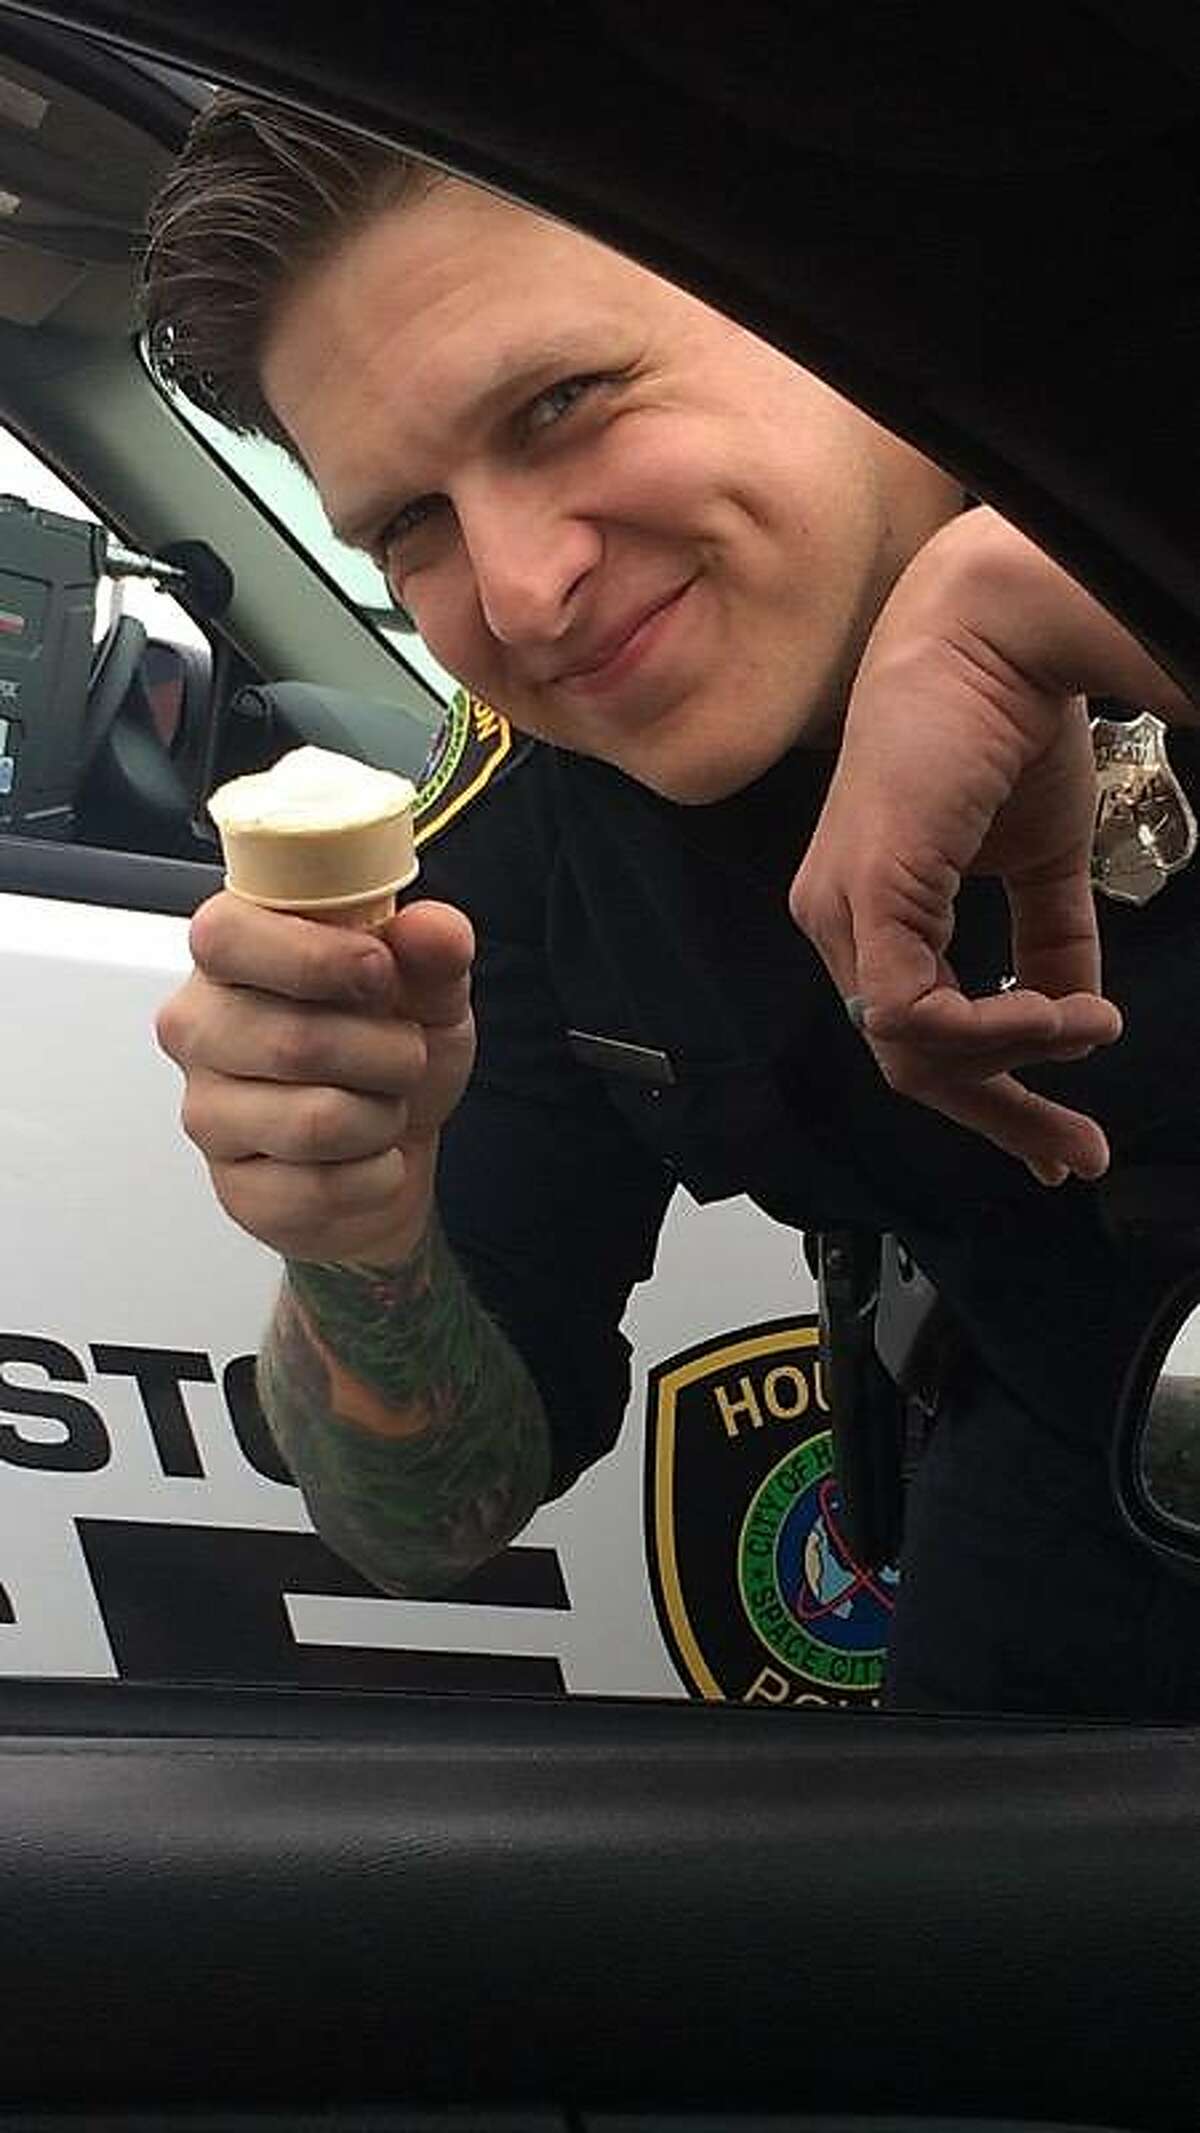 Sergeant Christopher Brewster Houston Police Department, TX End of Watch: Saturday, December 7, 2019 Cause of Death: Gunfire Brewster, 32, was gunned down responding to a domestic violence call in east Houston. Photo courtesy of HPD Ofc. G Dane Garcia.